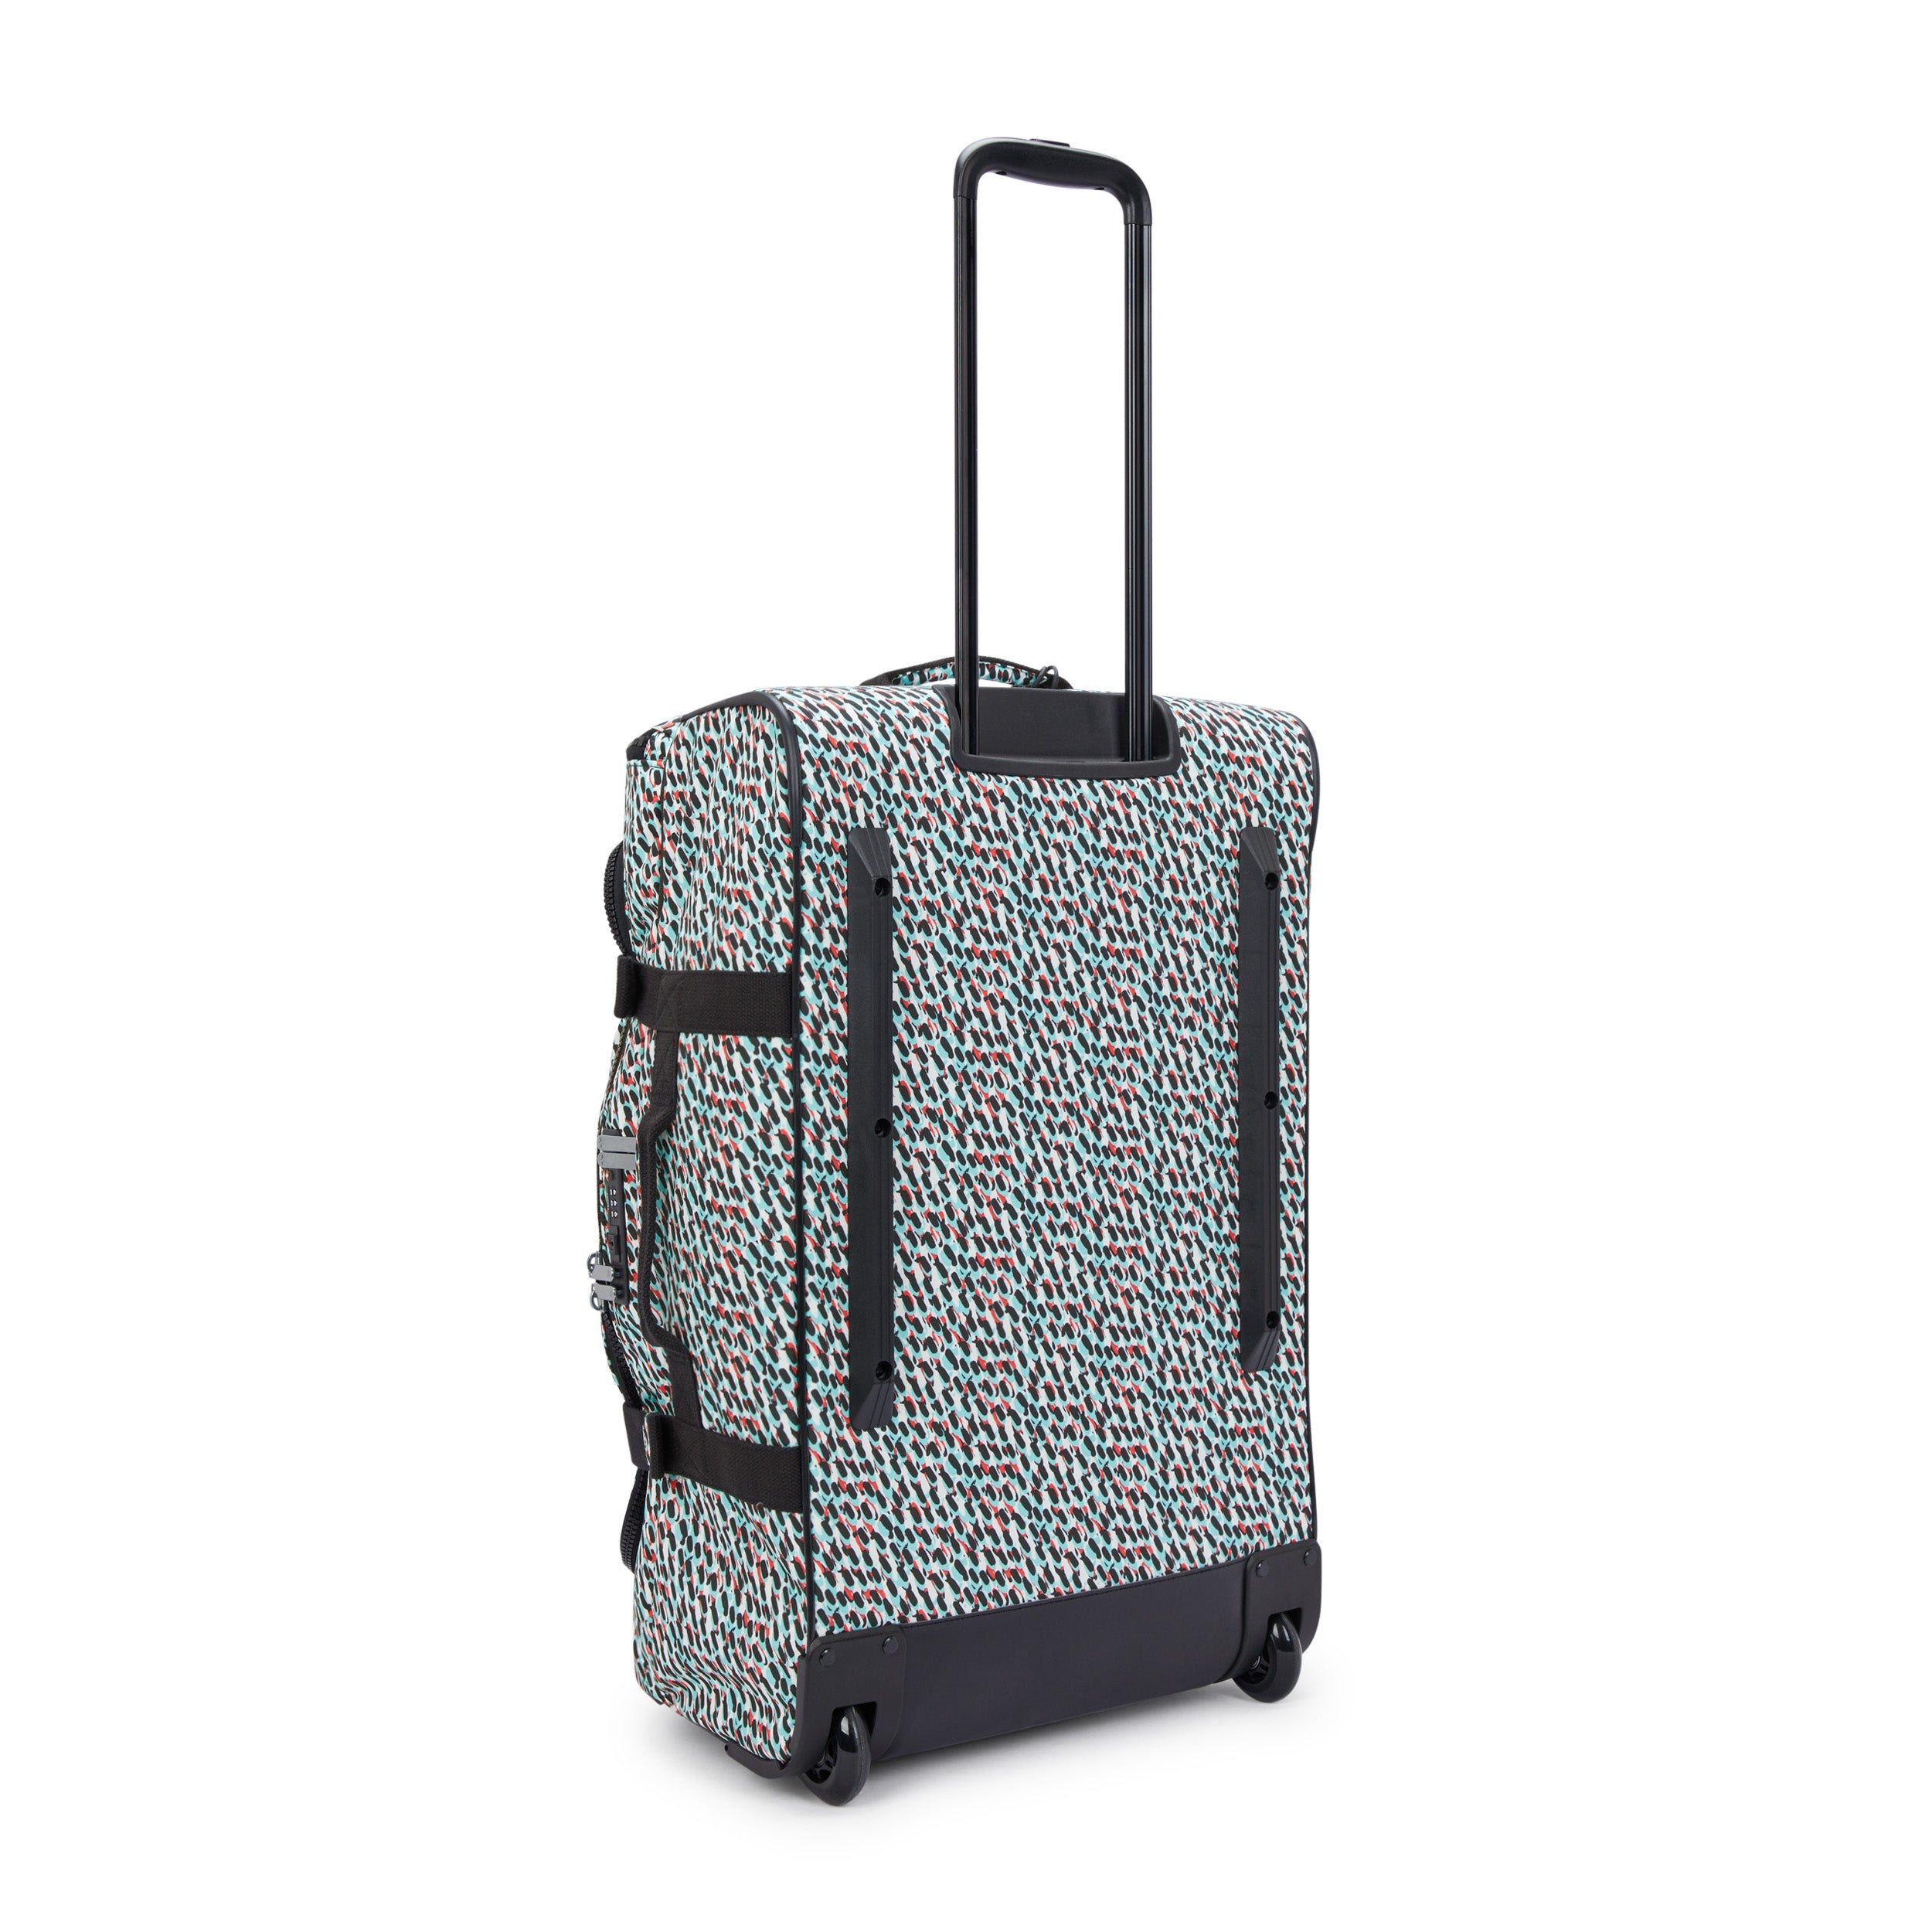 Kipling-Aviana M-Edium Wheeled Suitcase With Adjustable Straps-Abstract Print-I6311-Gn6